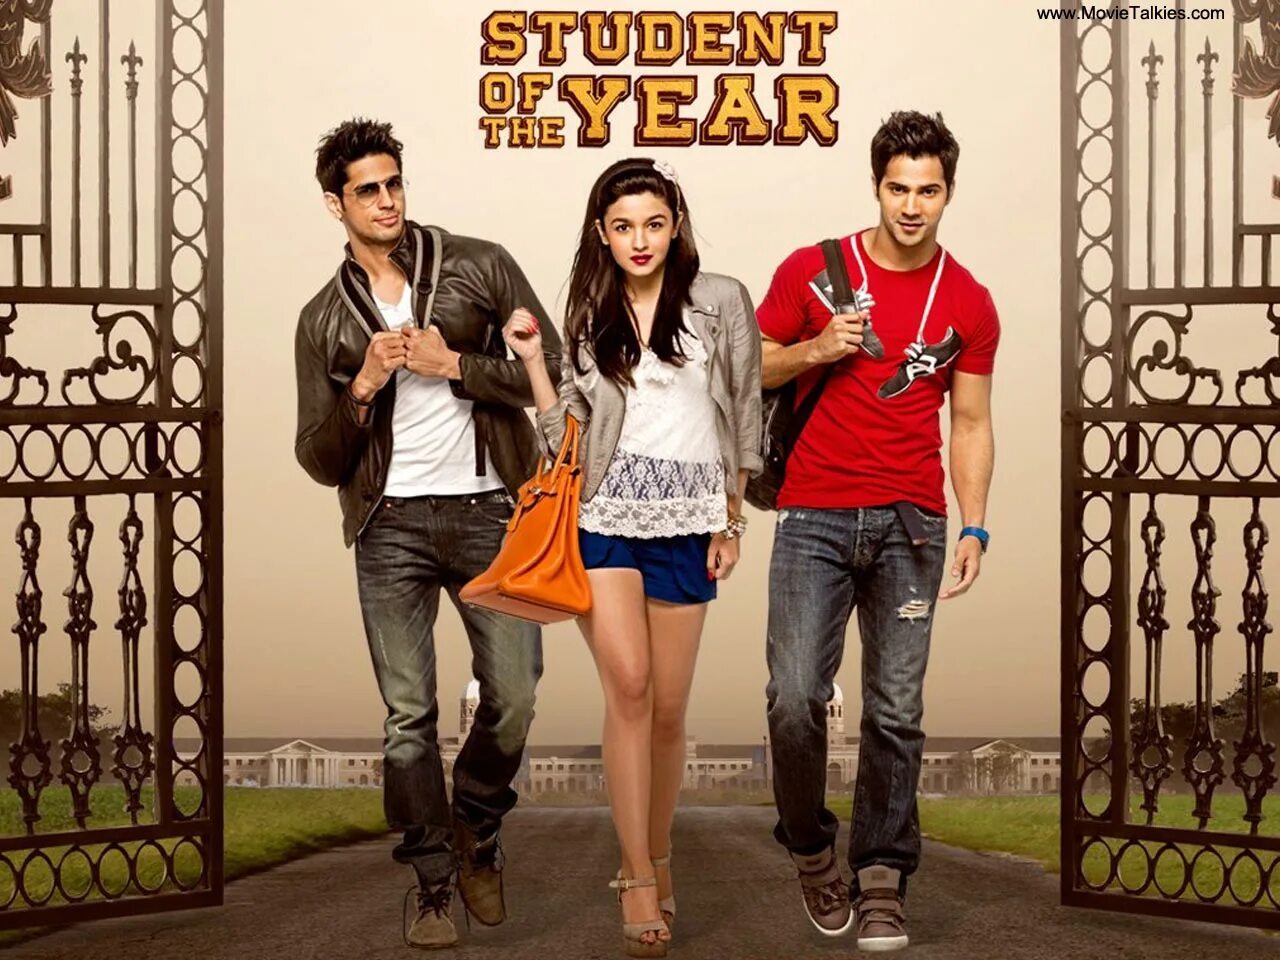 Students movies